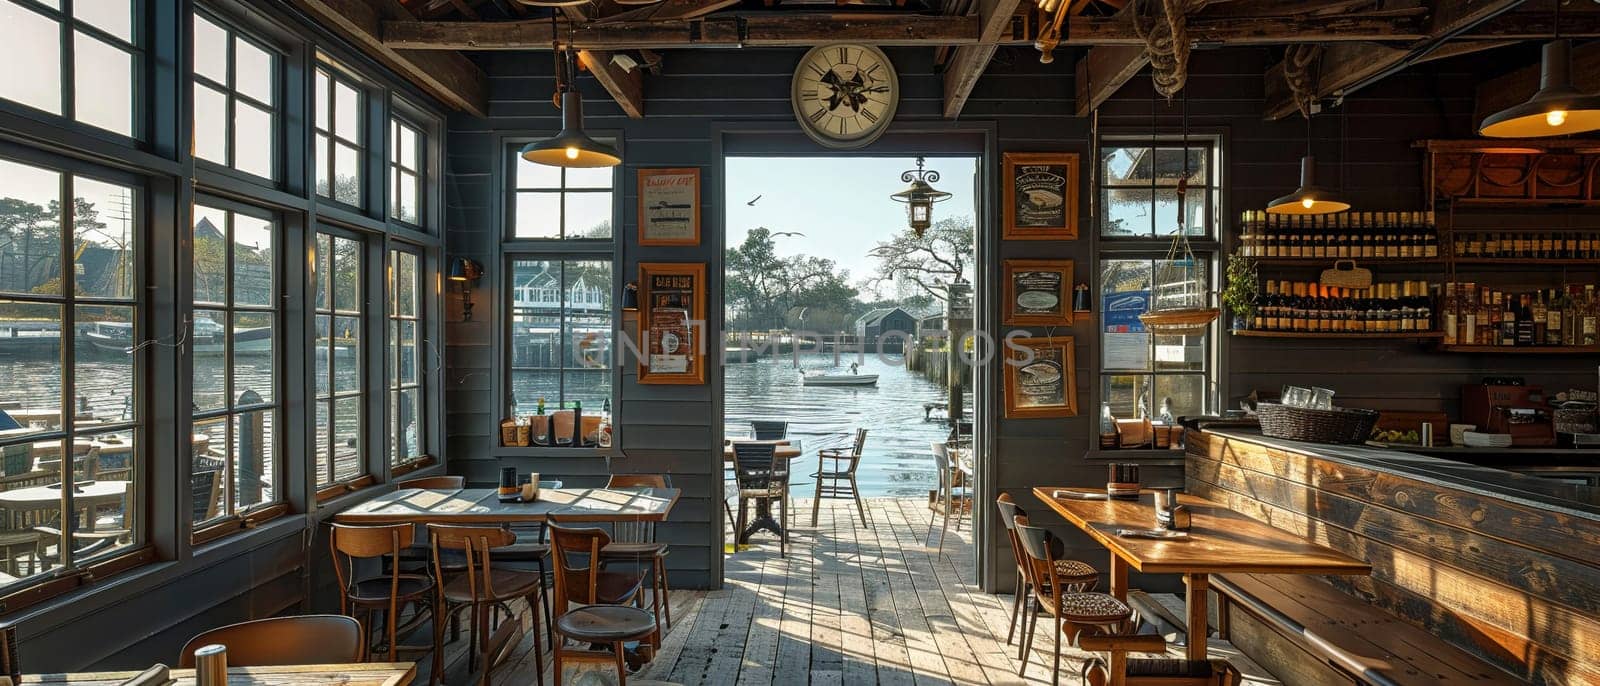 Seaside seafood restaurant with dockside views and nautical decor.